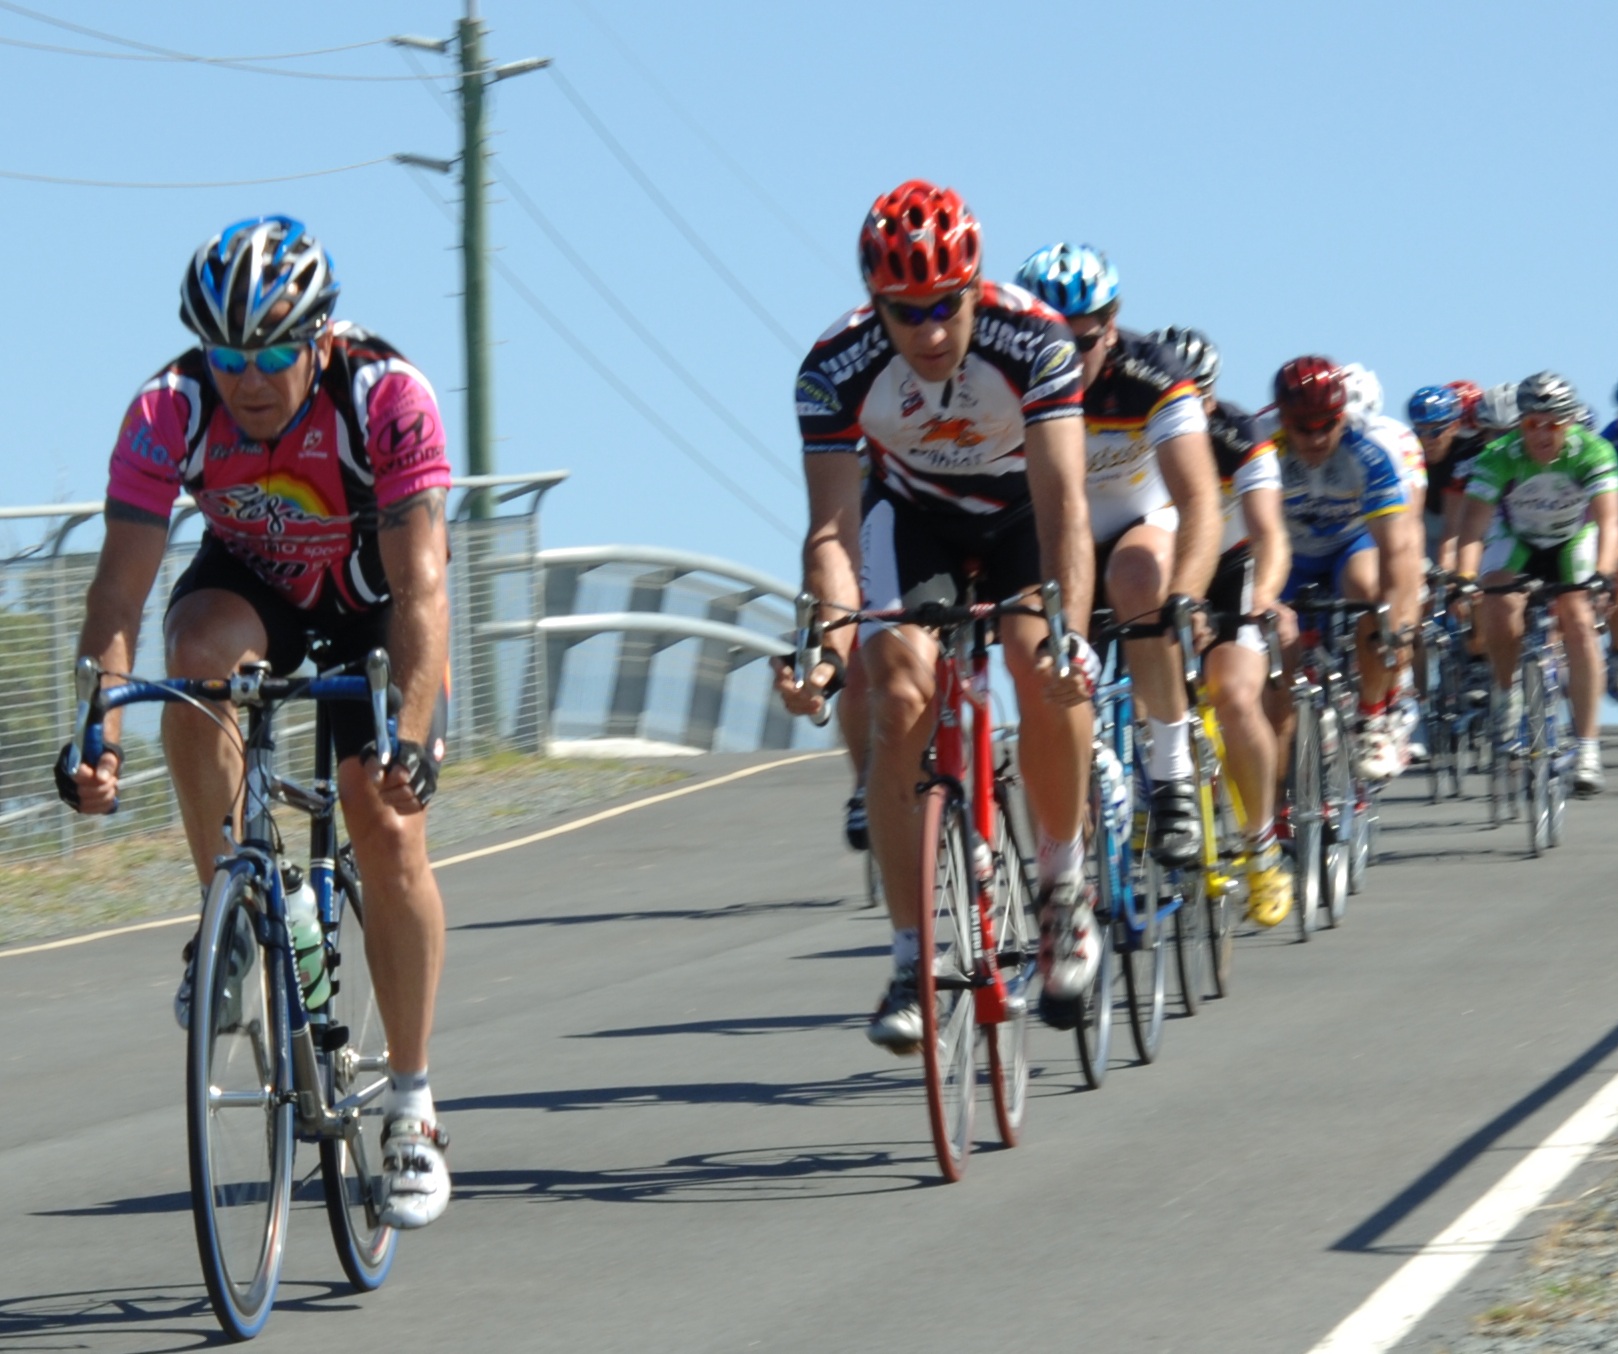 Paul Hawker looks to fly past his cycling competition - Pan Pacific ...